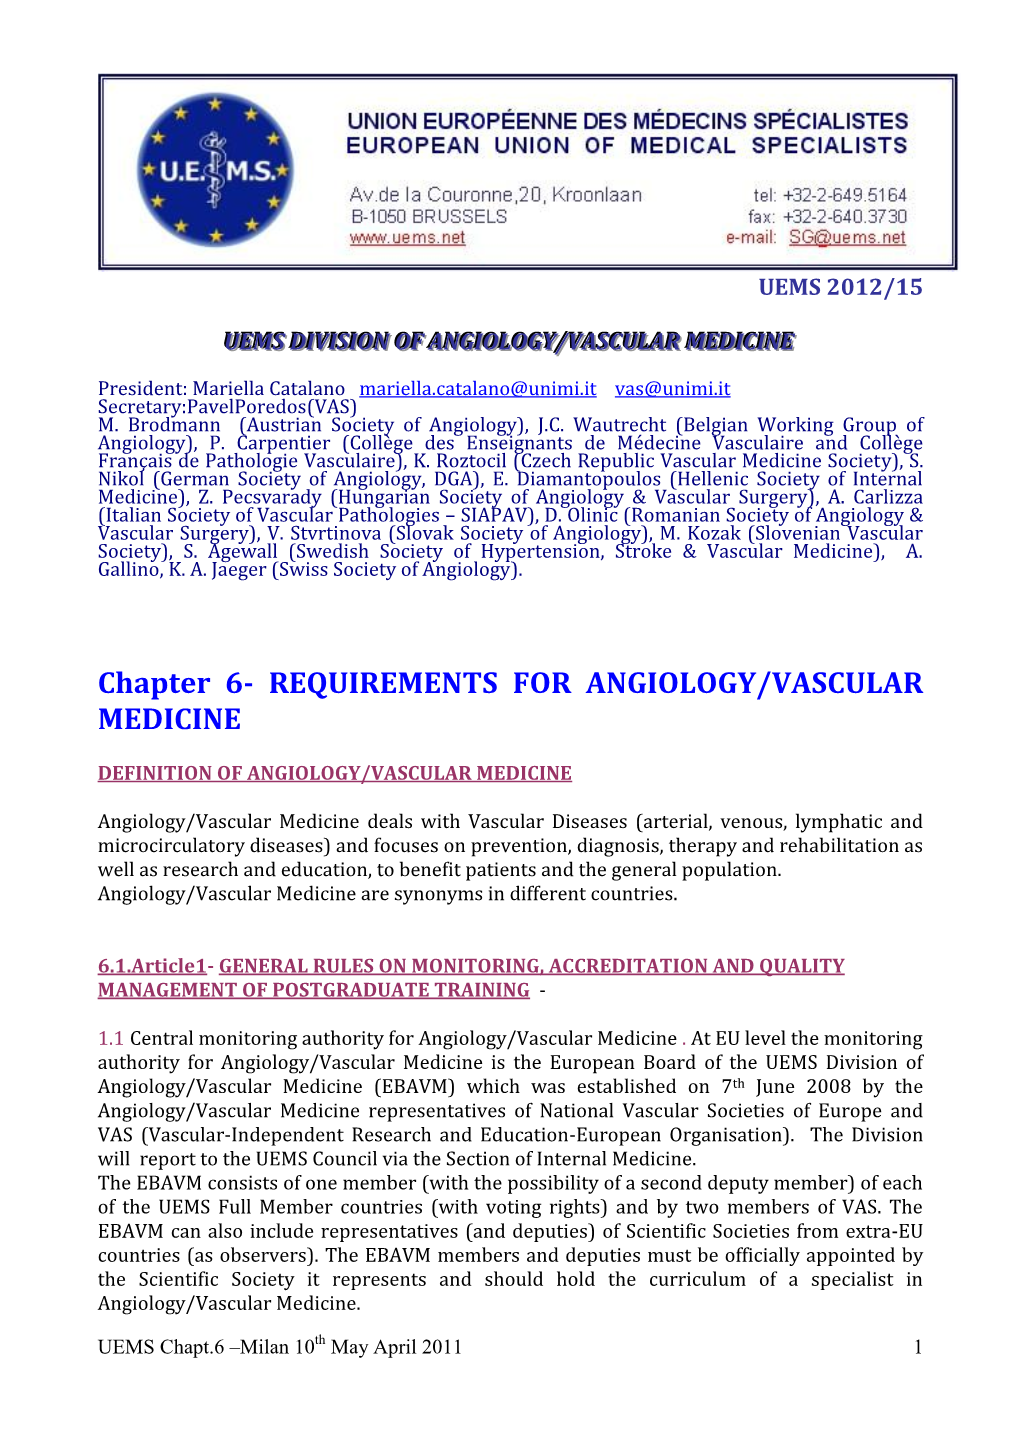 Chapter 6- REQUIREMENTS for ANGIOLOGY/VASCULAR MEDICINE